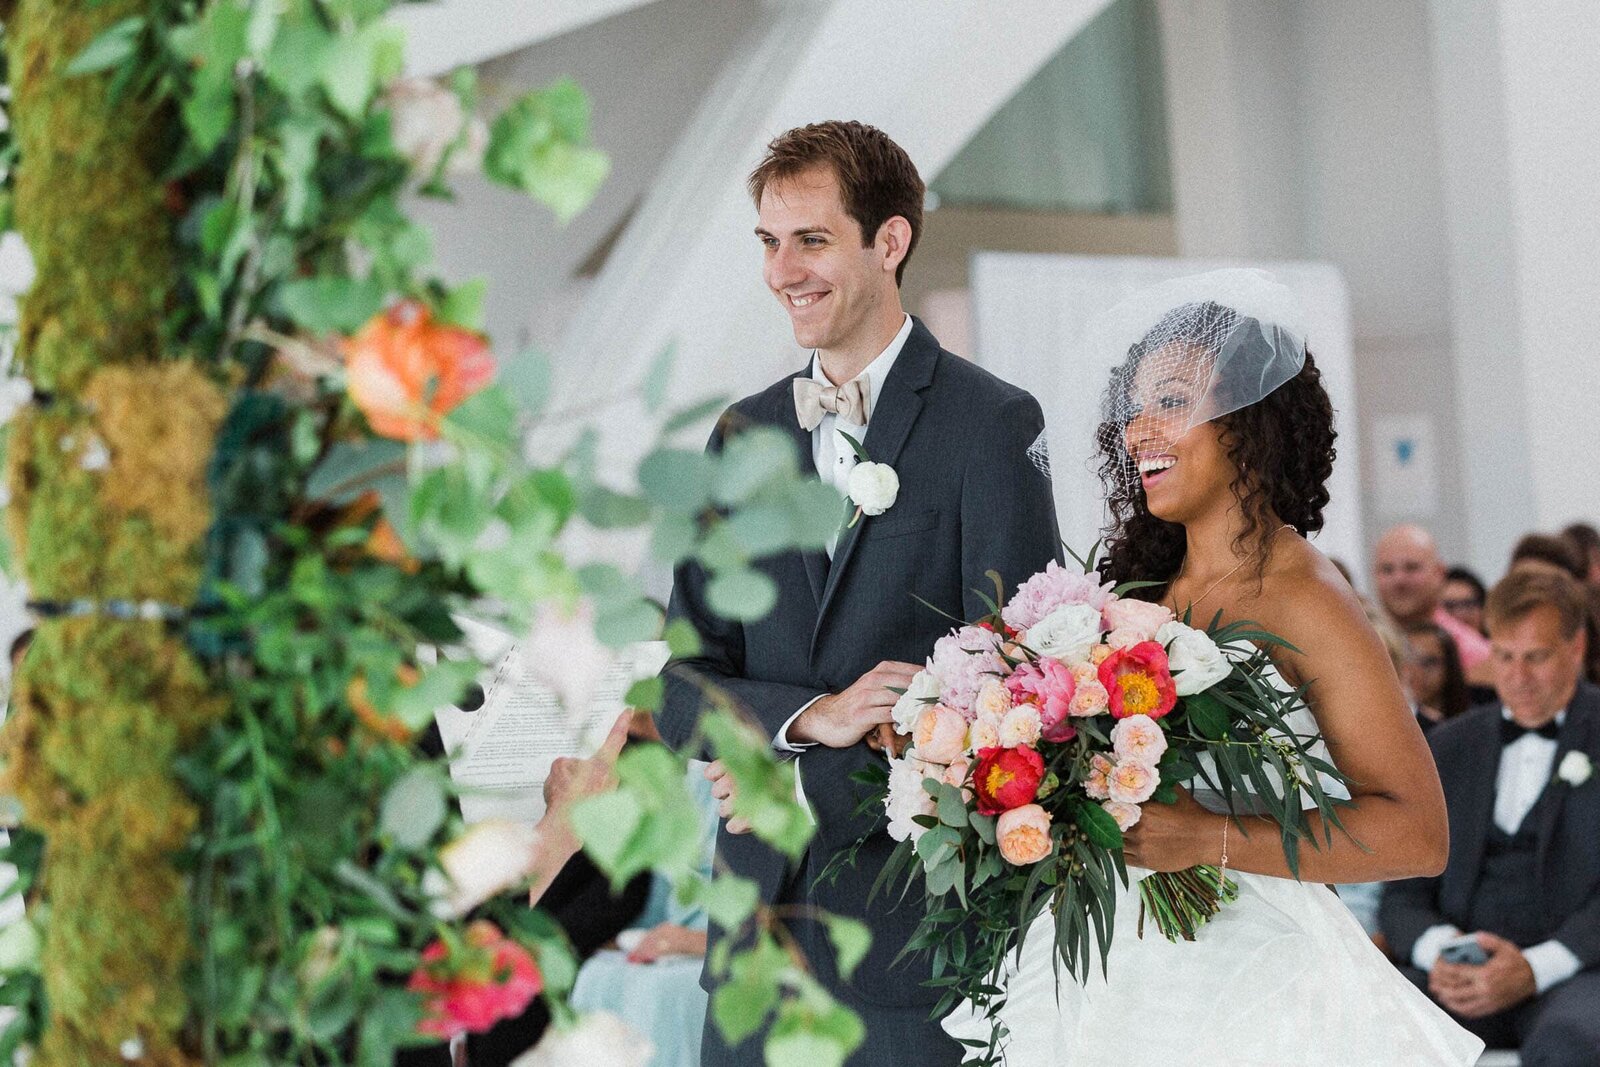 Bride and groom smiling while bride holds bouquet walking down aisle